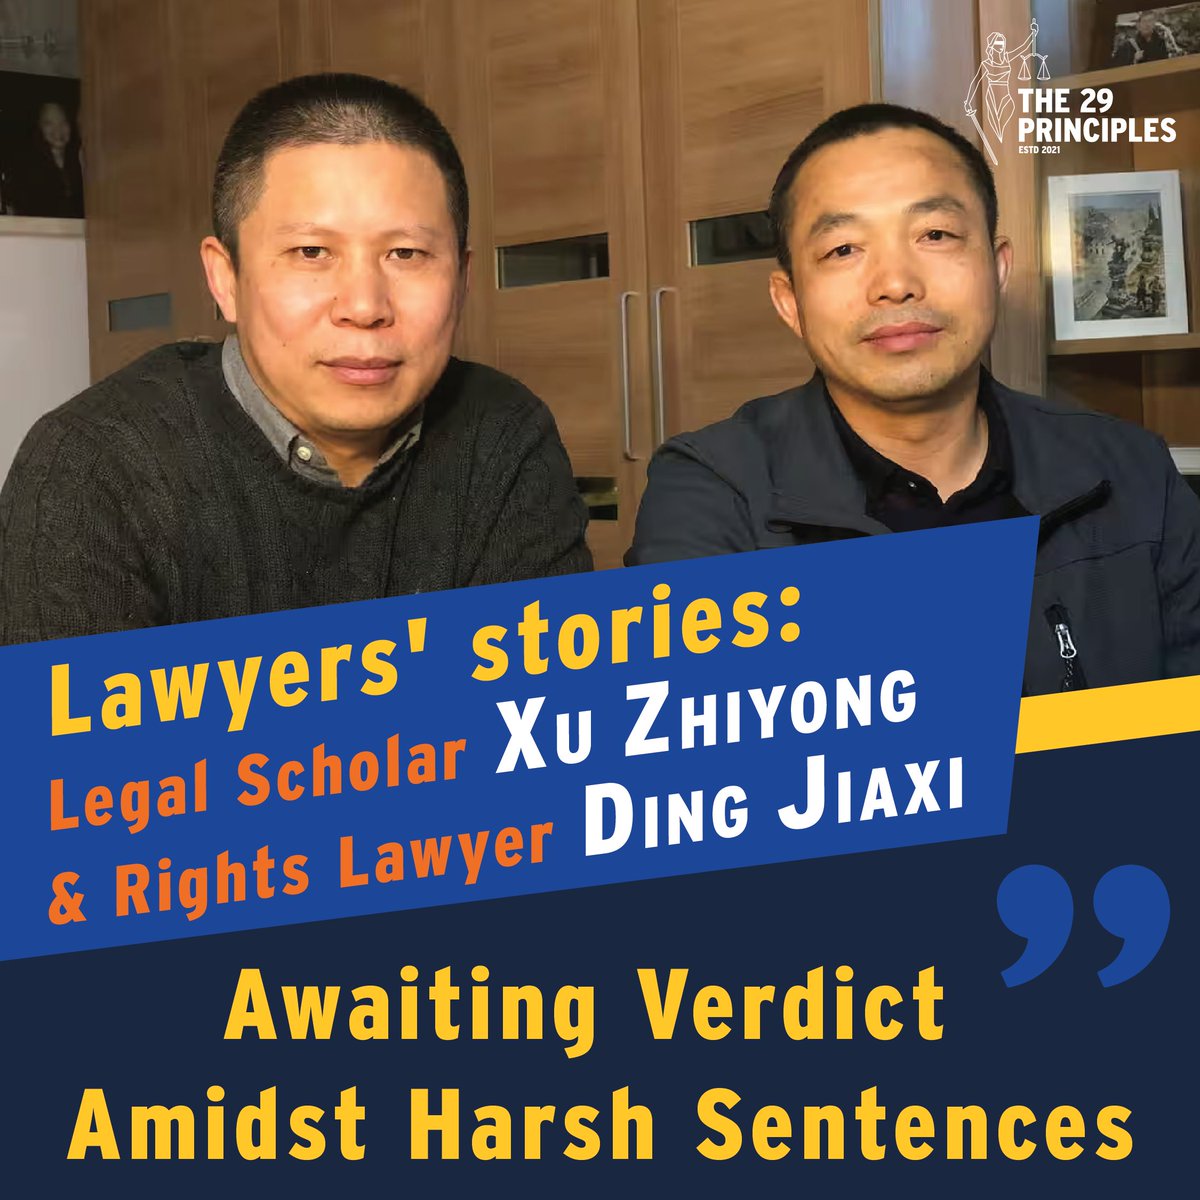 [Feature story] #XuZhiyong and #DingJiaxi face harsh sentences for their peaceful activism. The feature story highlights how they became targets of officials and the pressure faced by their loved ones and families. Full story (Chinese only) : 29principles.uk/zh-hant/DJXZ